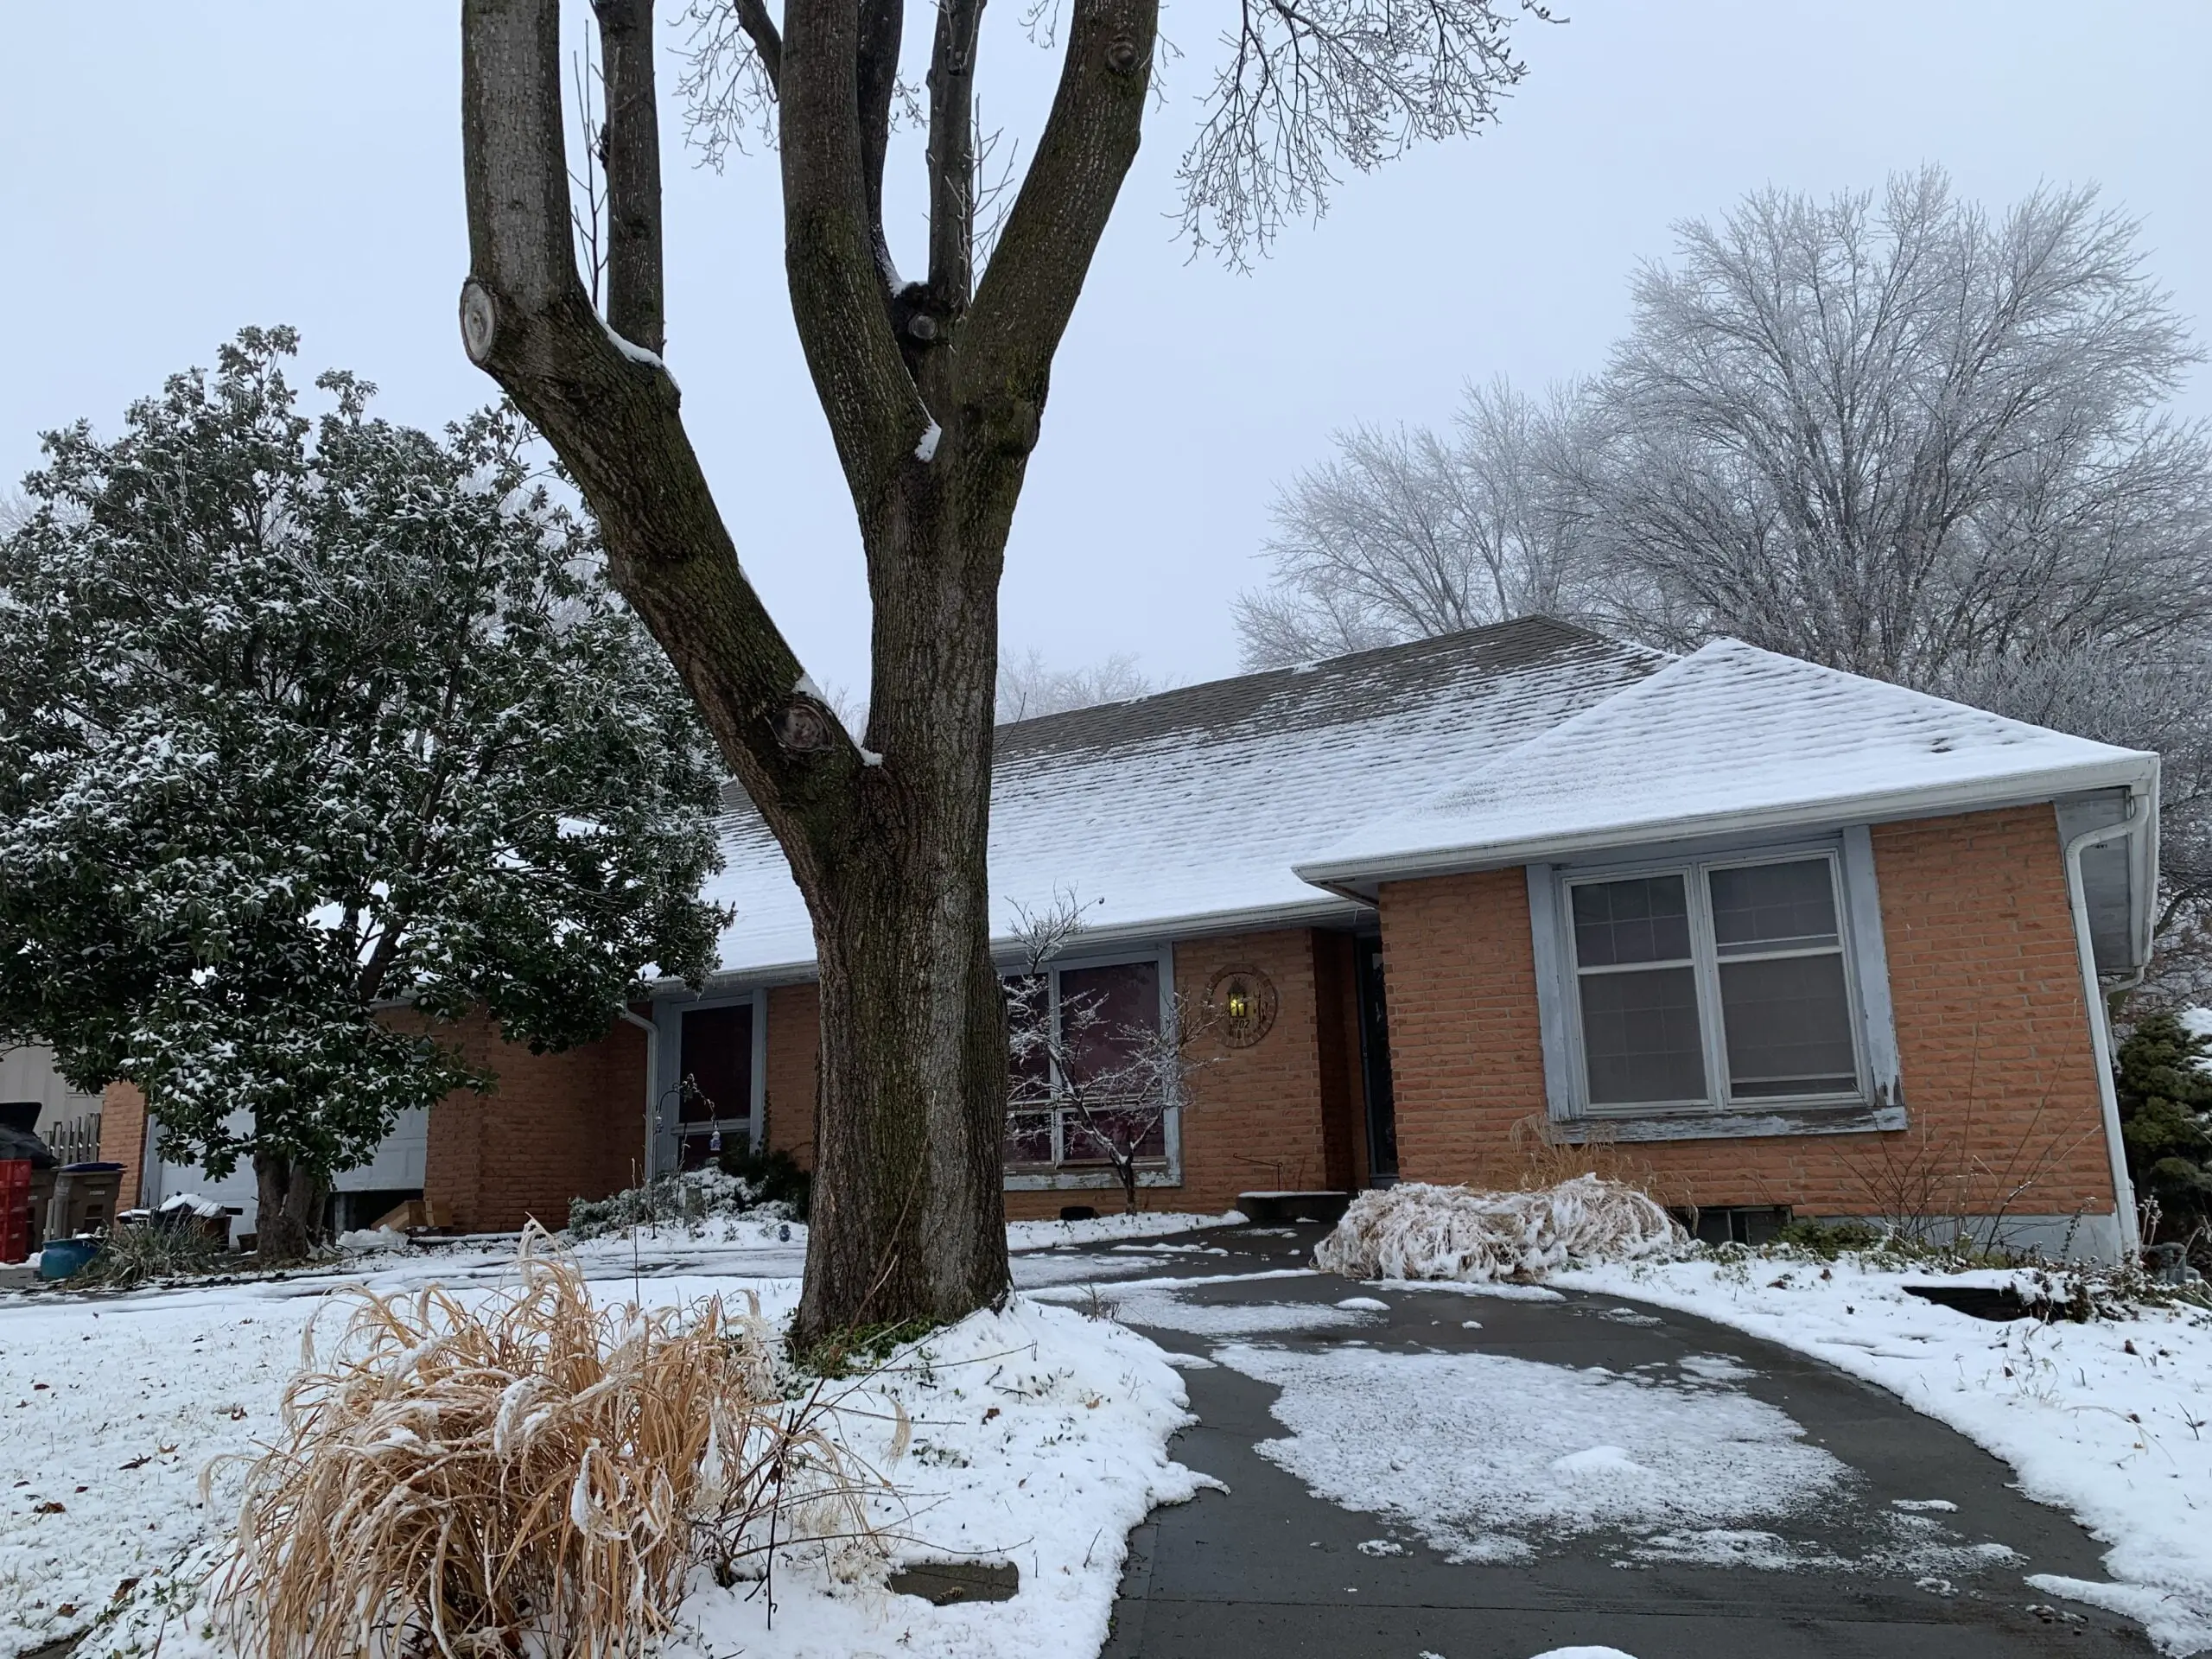 a house with snow on the ground and a tree in front of it